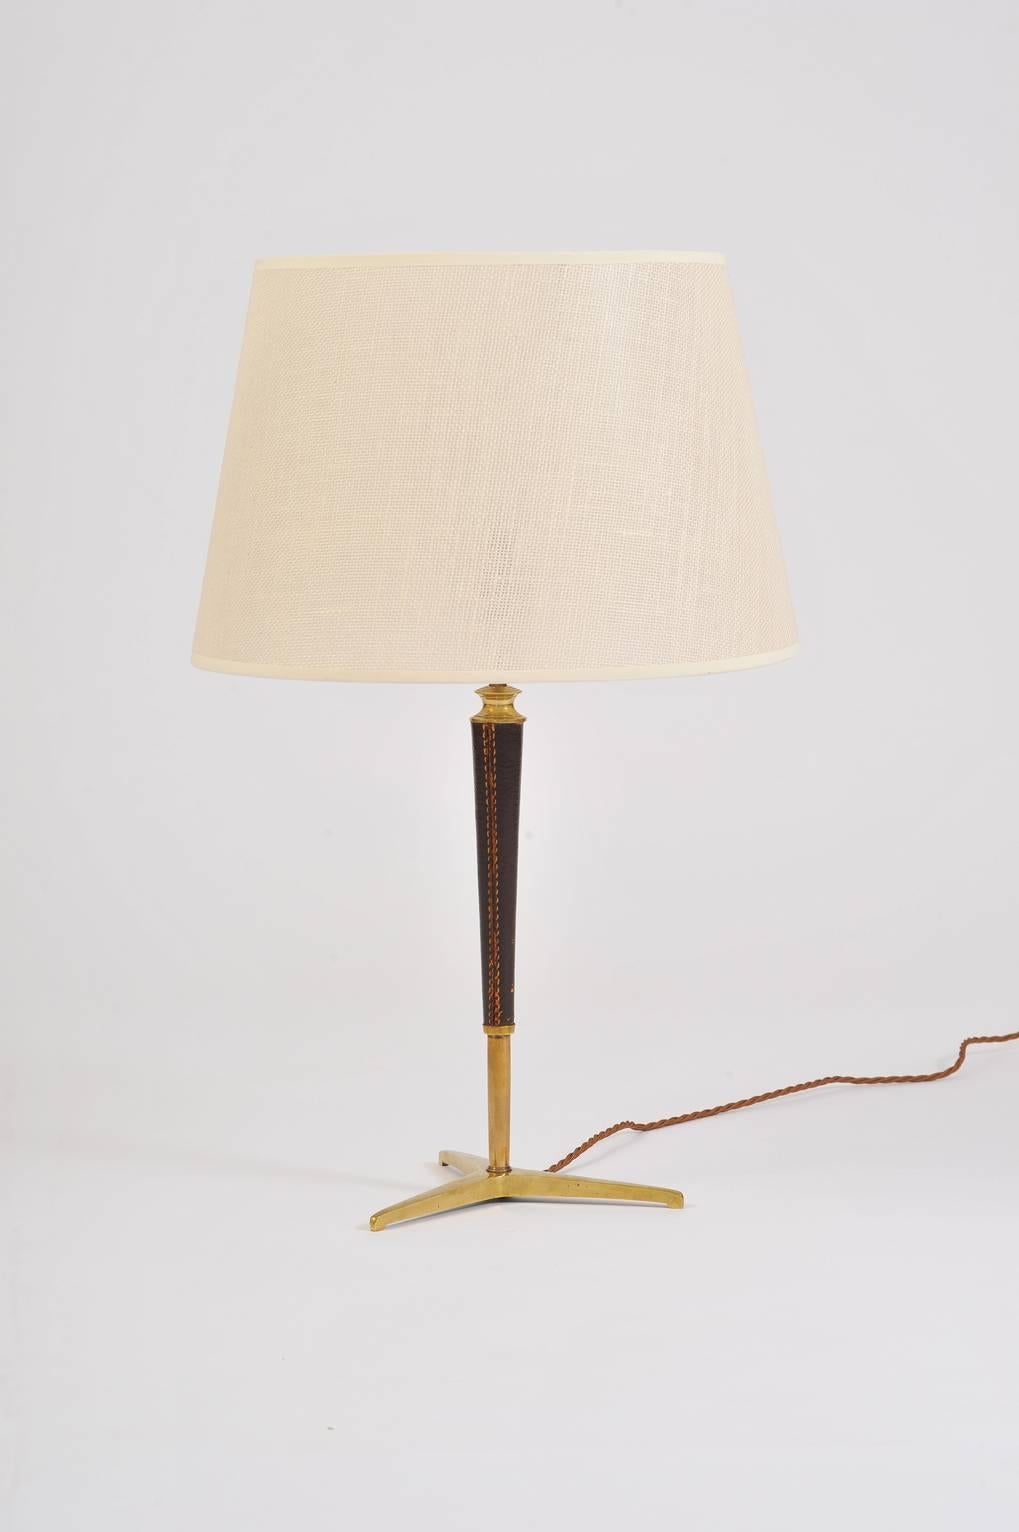 A brass and stitched brown leather table lamp, in the manner of Jacques Adnet (1901-1984)
With a bespoke textured fabric shade
France, circa 1950.